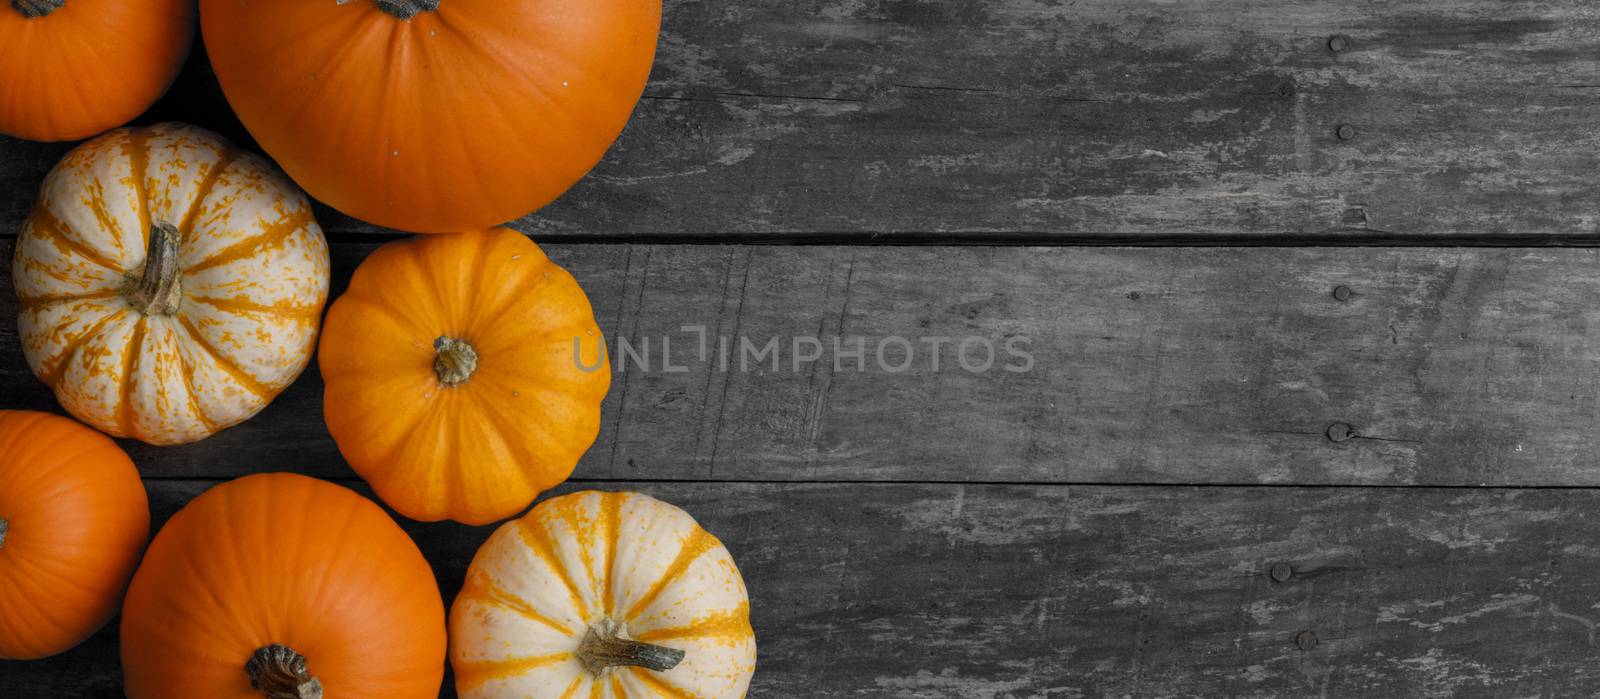 Border of pumpkins on wood background by Yellowj